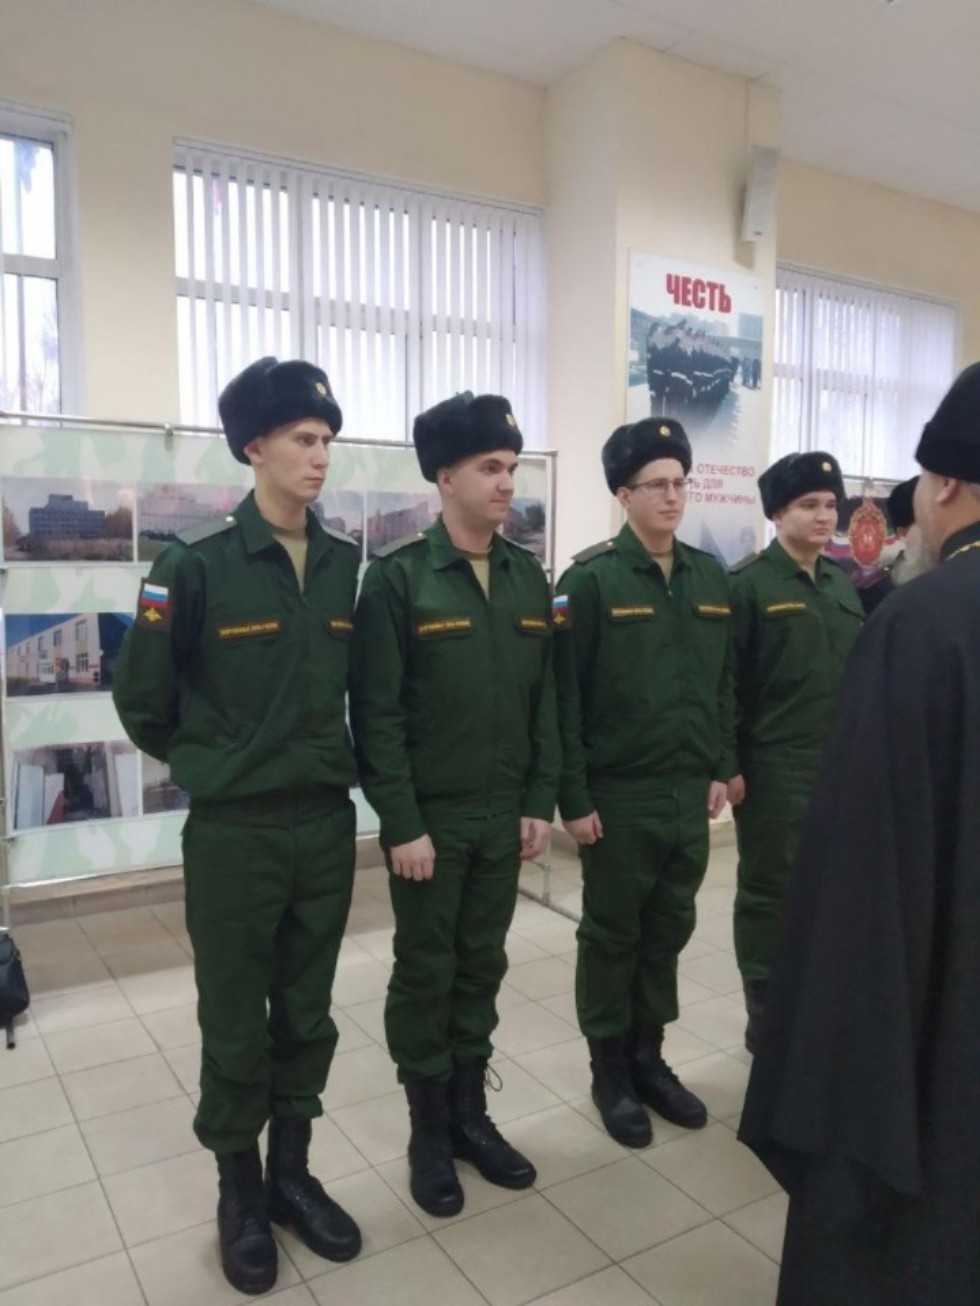 A graduate of LIRS, Evgeni Denisov, is leaving for the scientific troop of the military innovation technopolis 'Era'